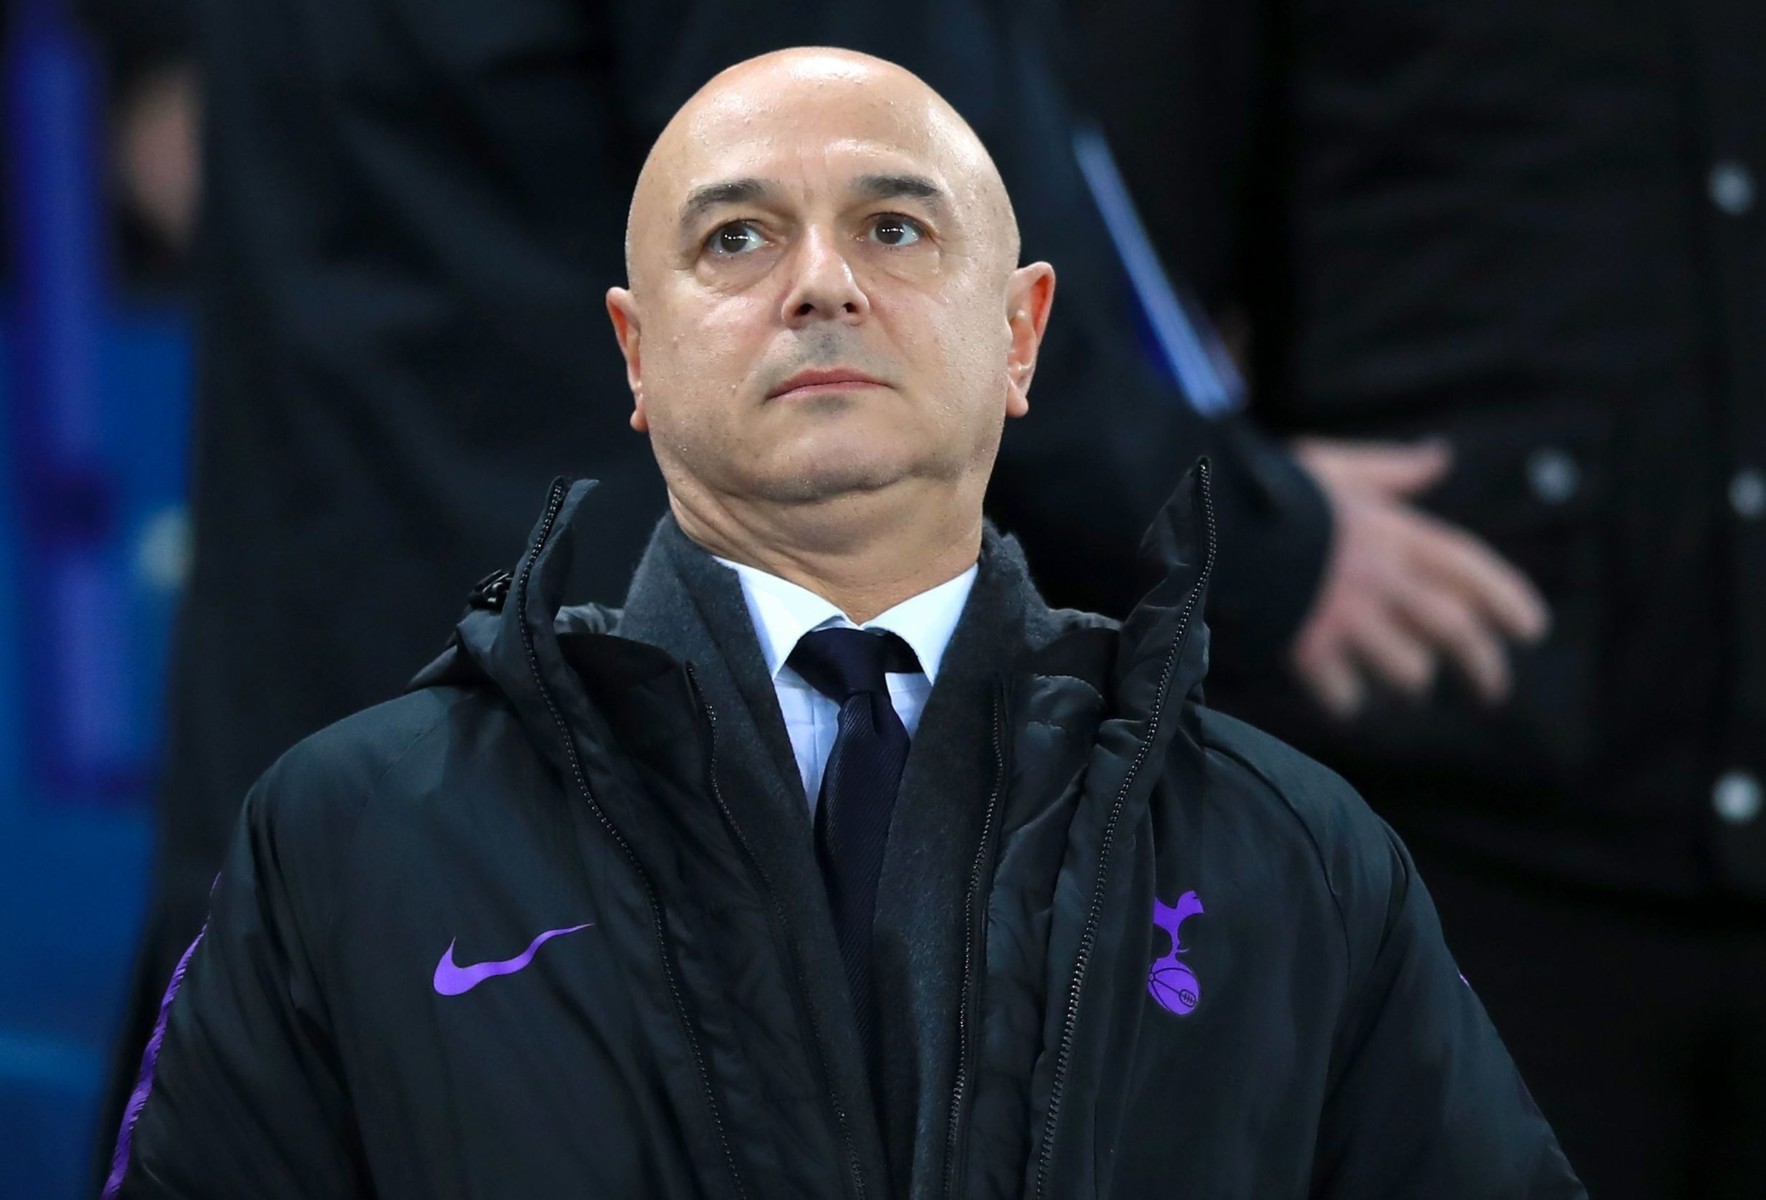 Tottenham supremo Daniel Levy appeared to send out mixed message amid the coronavirus pandemic